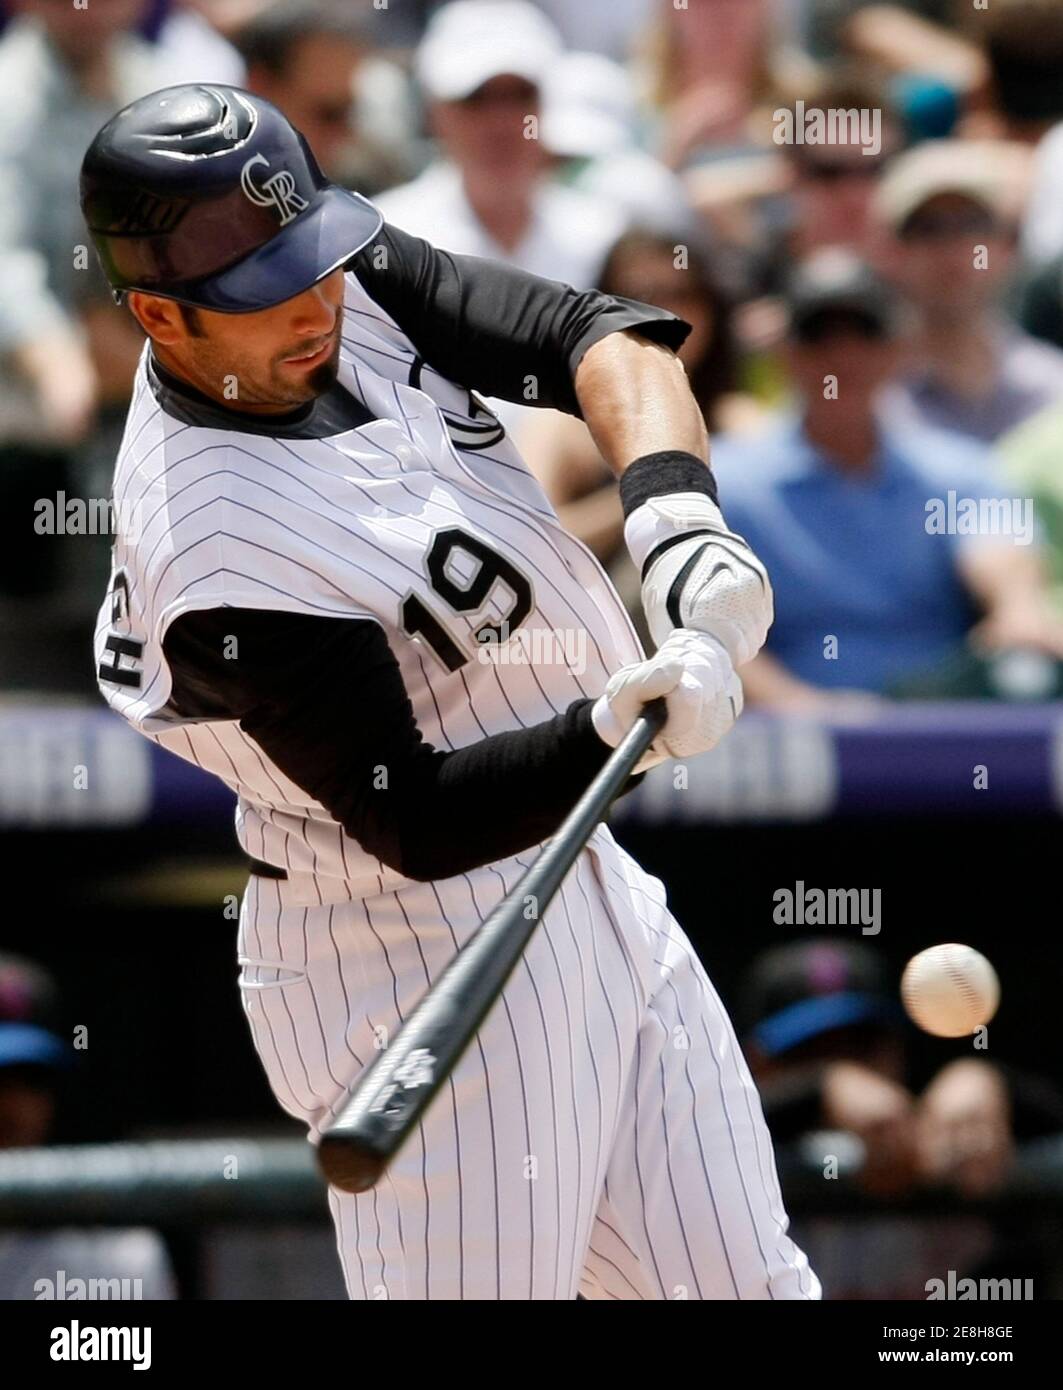 Colorado Rockies Ryan Spilborghs hits a single against the New York Mets in the fourth inning during their National League MLB baseball game in Denver, May 25, 2008.      REUTERS/Rick Wilking (UNITED STATES) Stock Photo